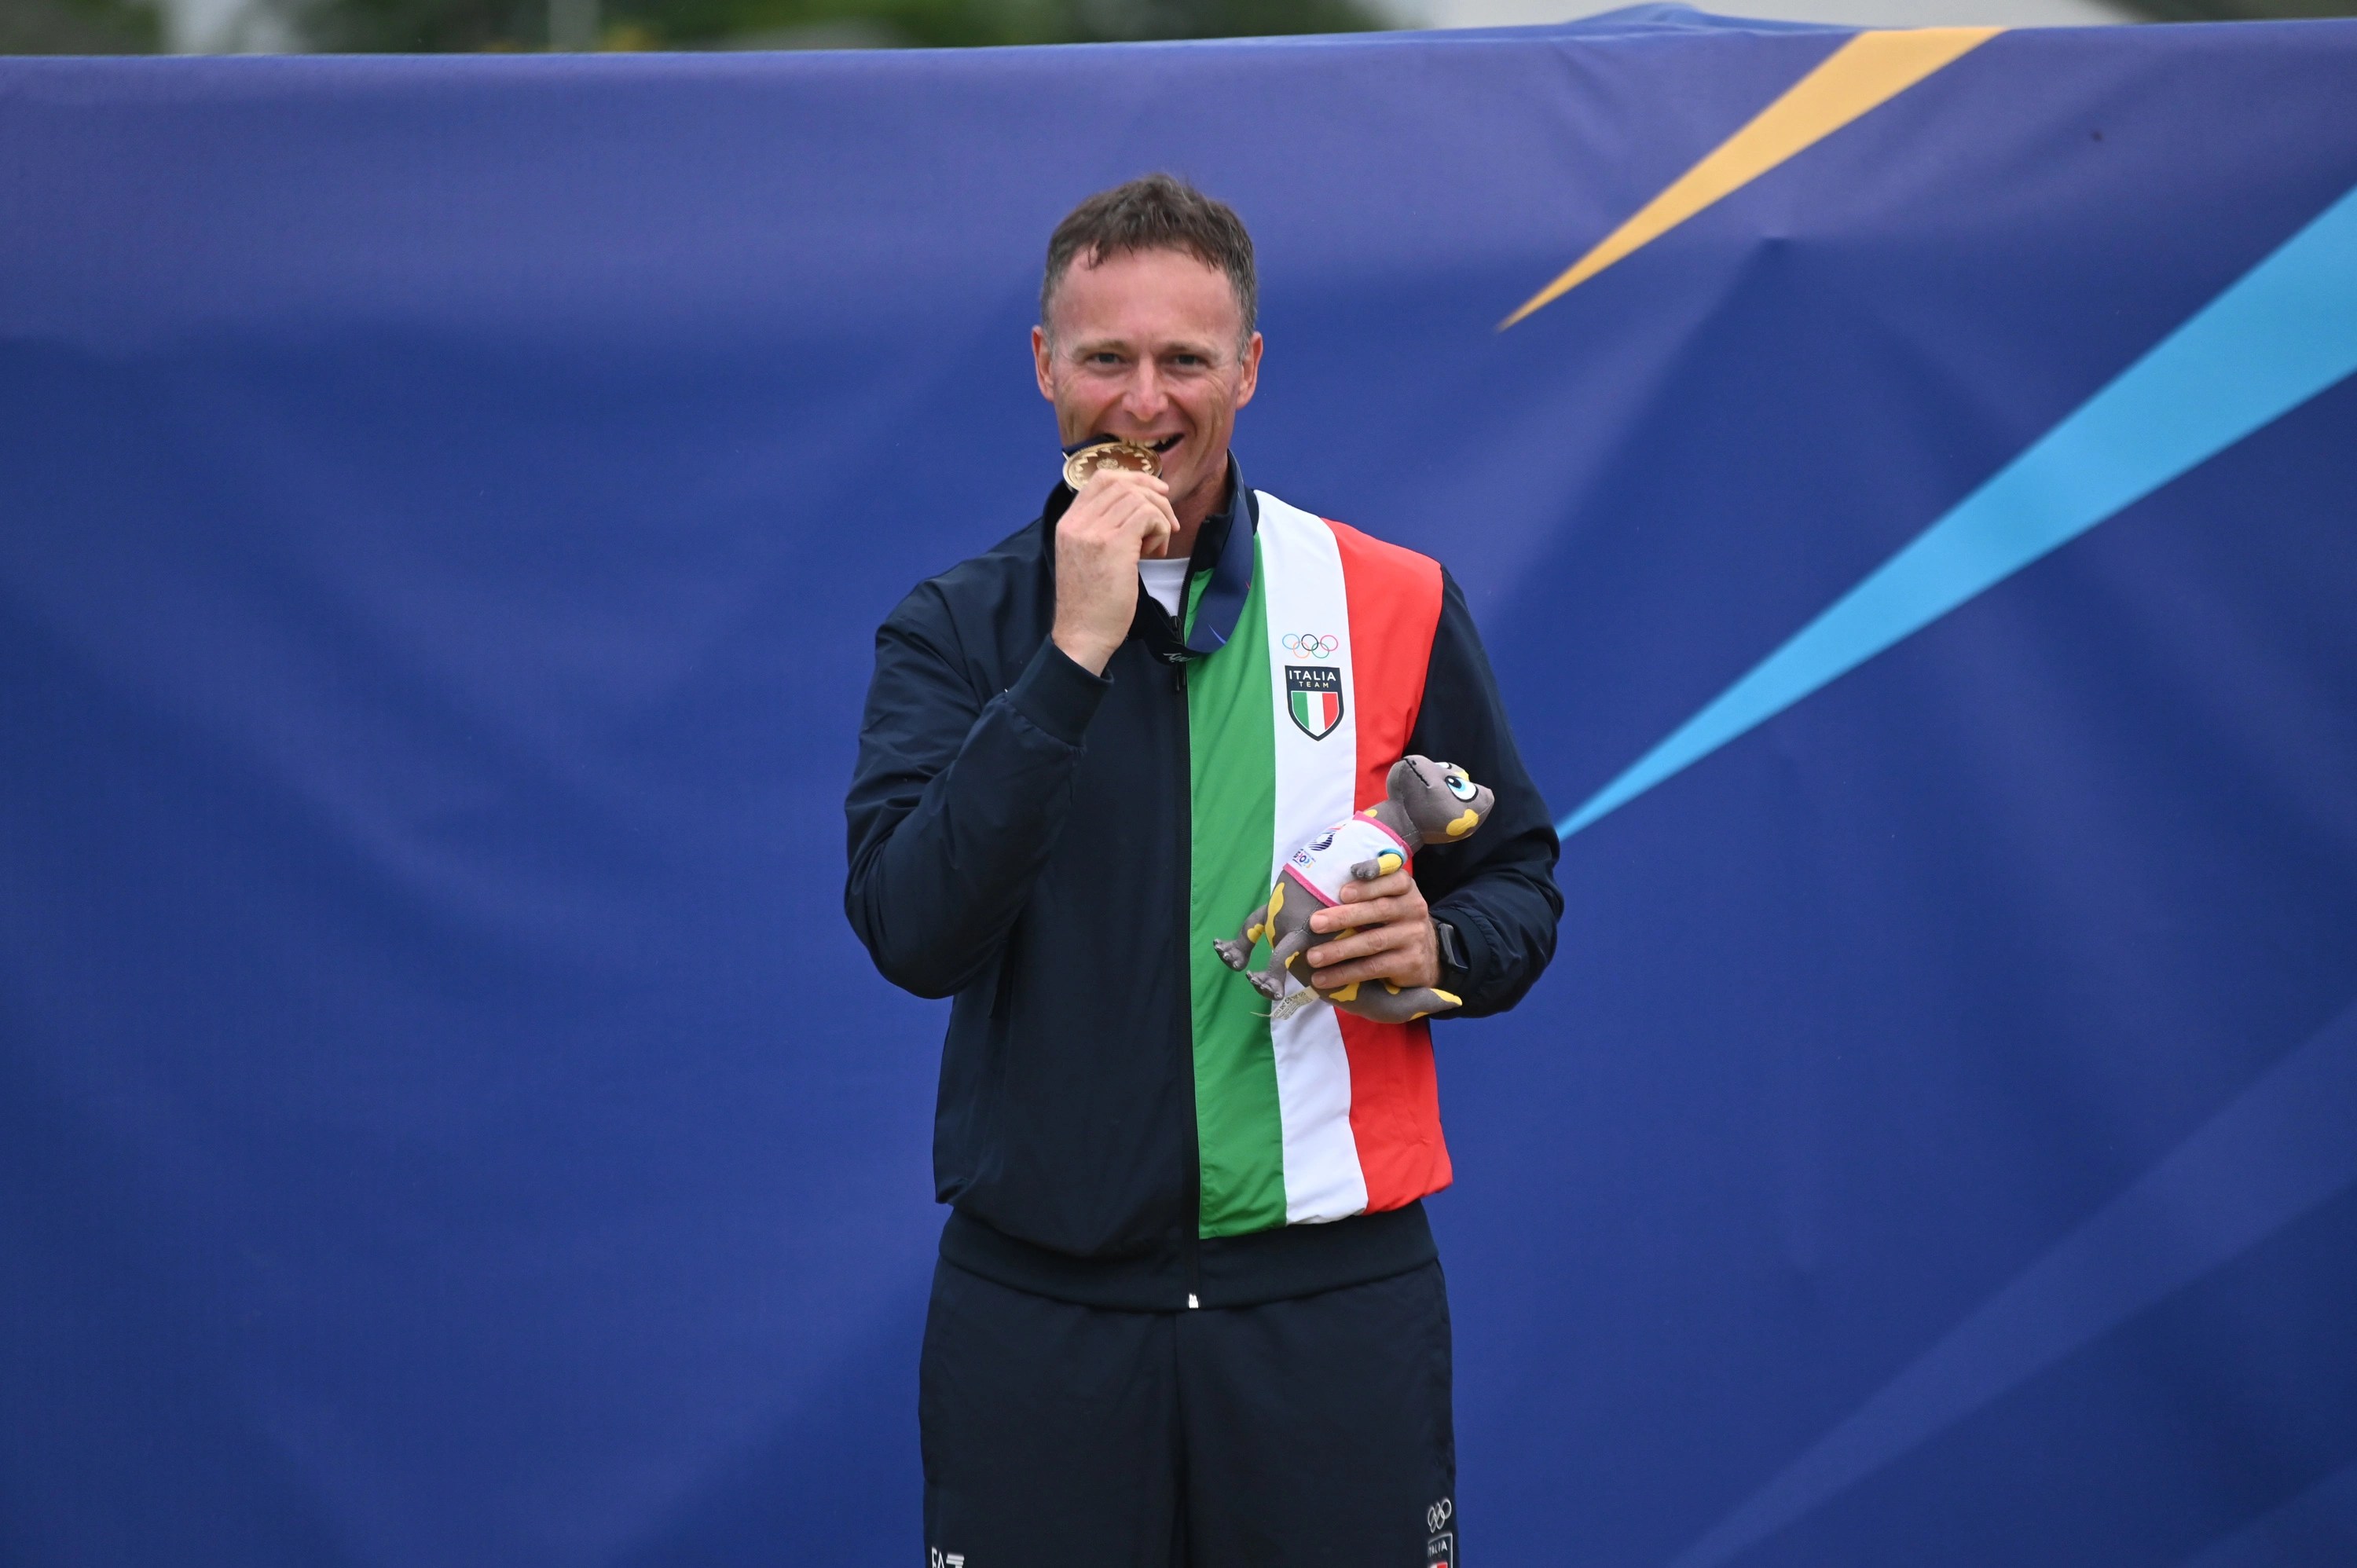 French won in pistol competition. Another golds for Italy. This time in Trap.